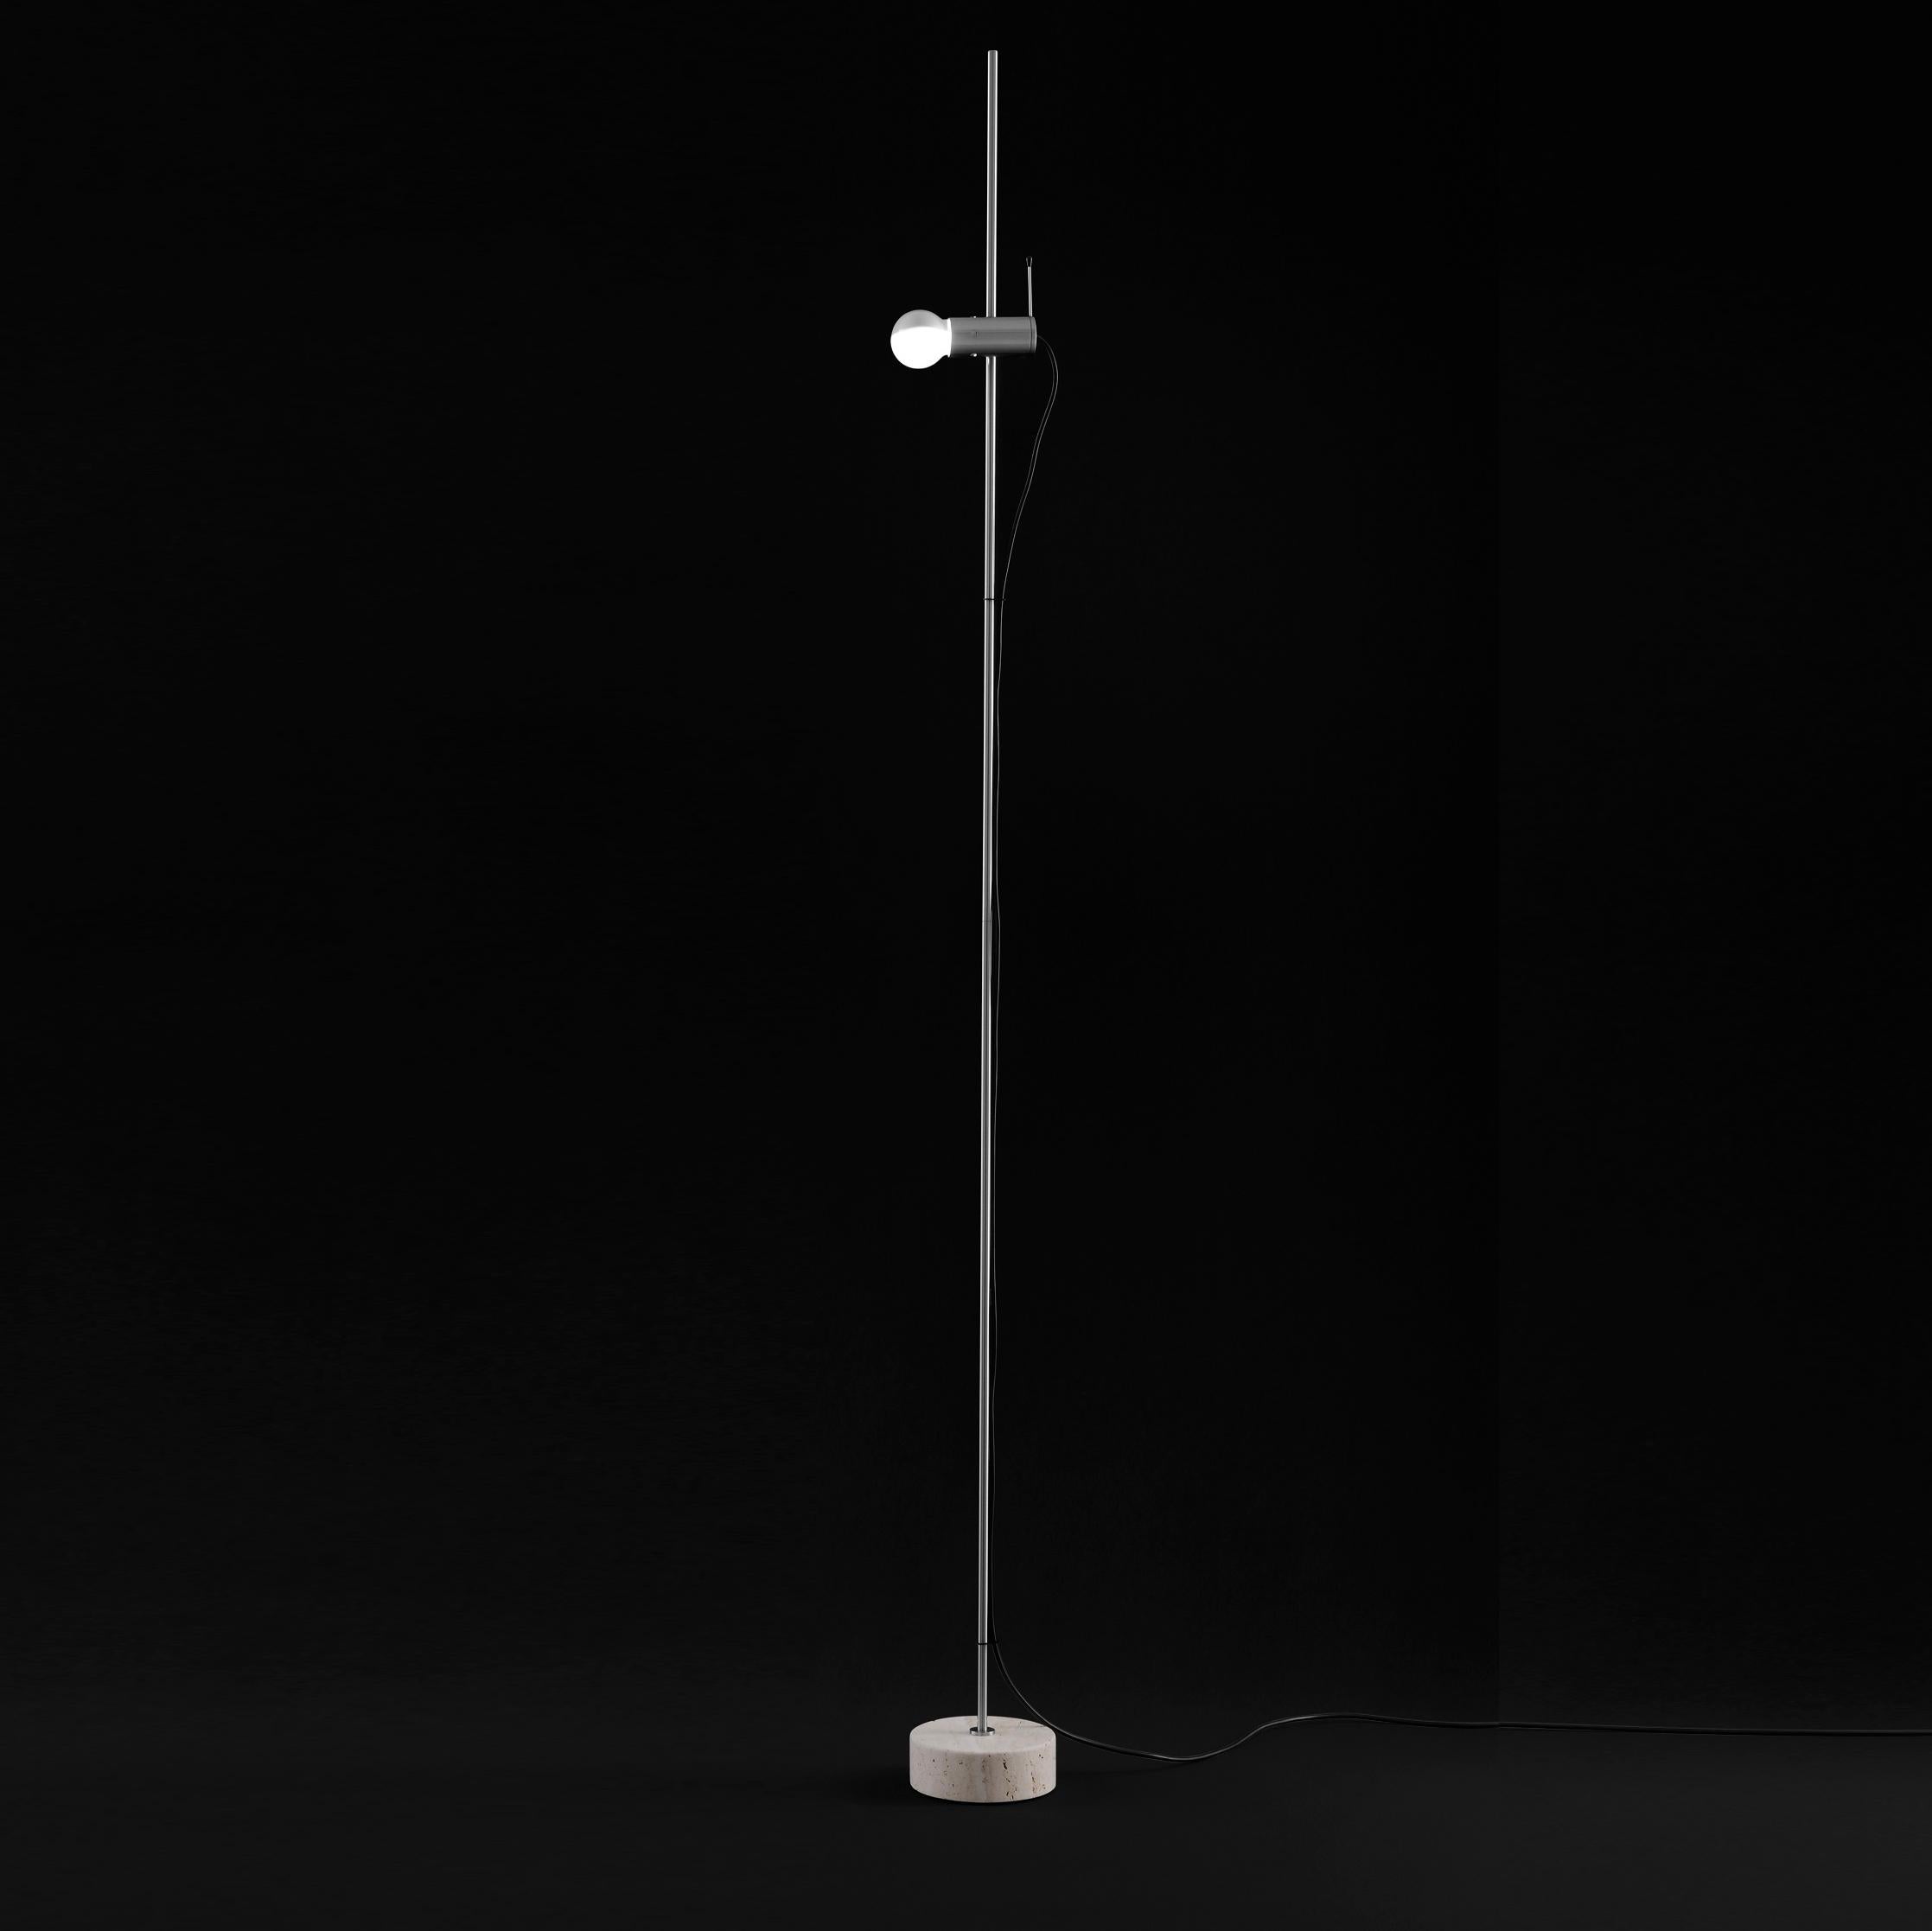 Floor lamp 'Agnoli' designed by Tito Agnoli in 1954.
Floor lamp giving direct light, Travertino marble base, stem and height adjustable reflector mat nickel-plated. Manufactured by Oluce, Italy.

As a precursor of minimalism, the Agnoli lamp used